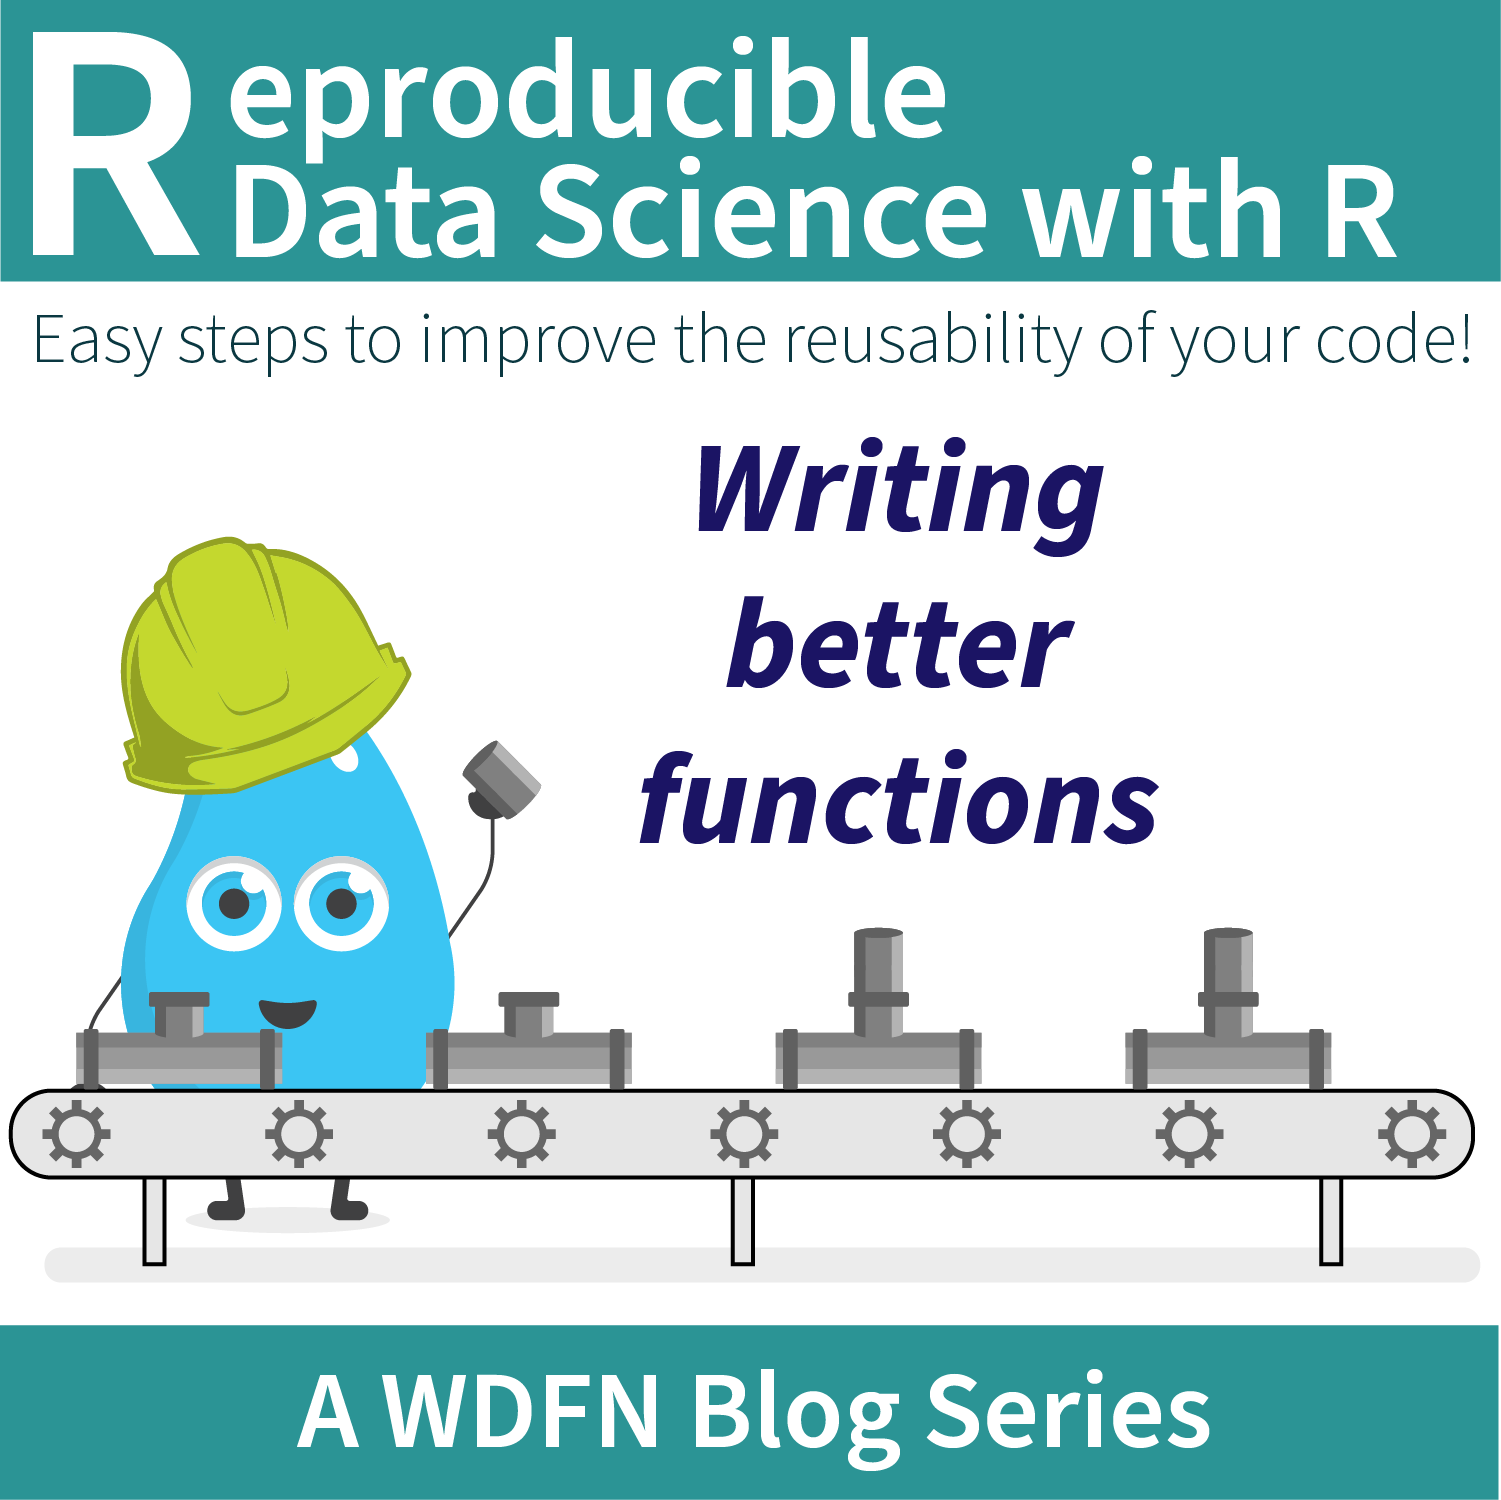 Reproducible Data Science in R: Writing better functions